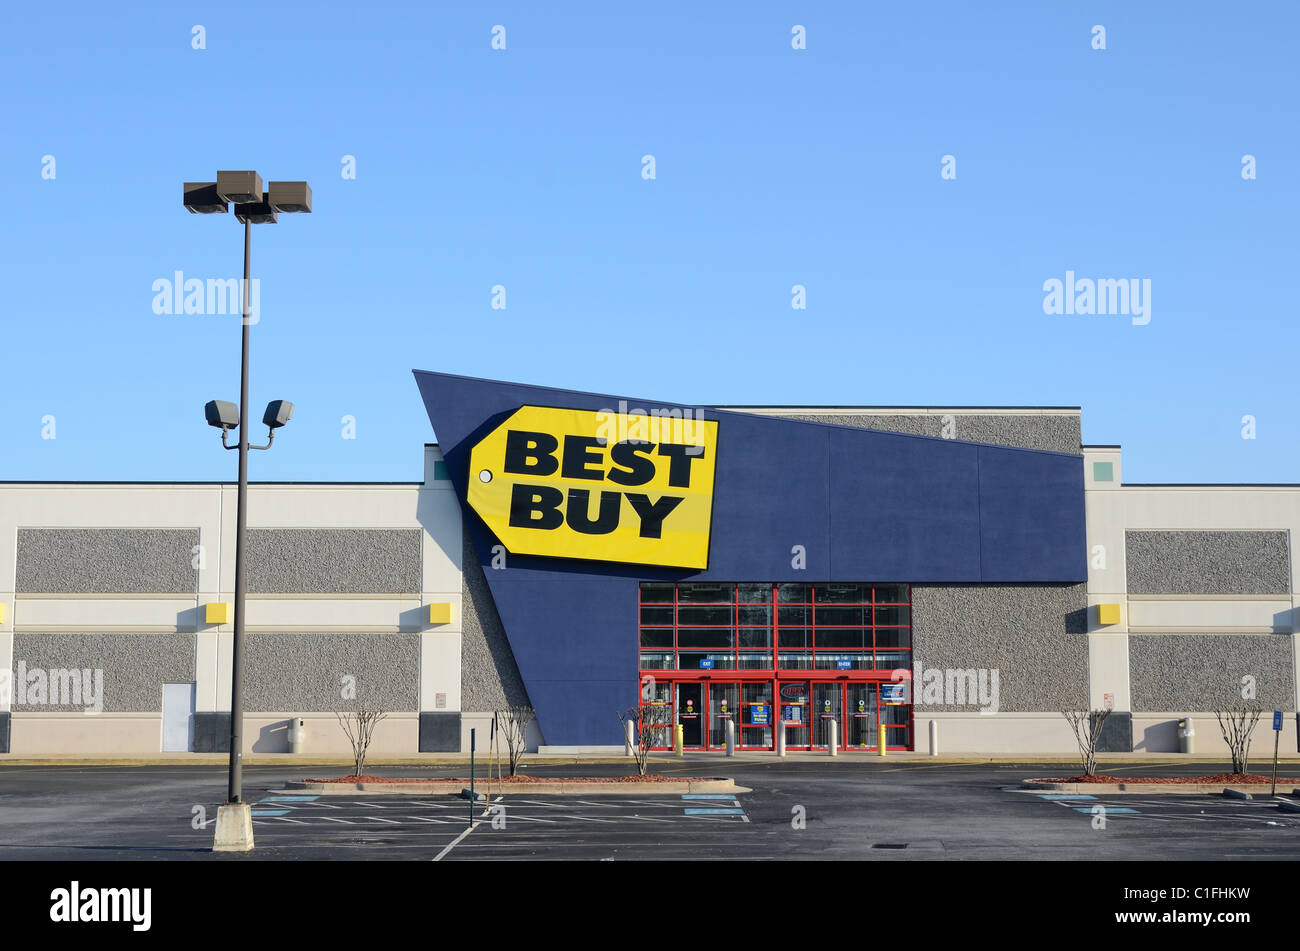 Athens, Georgia - March 17, 2010: A Best Buy March 17, 2010 in Athens, Ga. Stock Photo